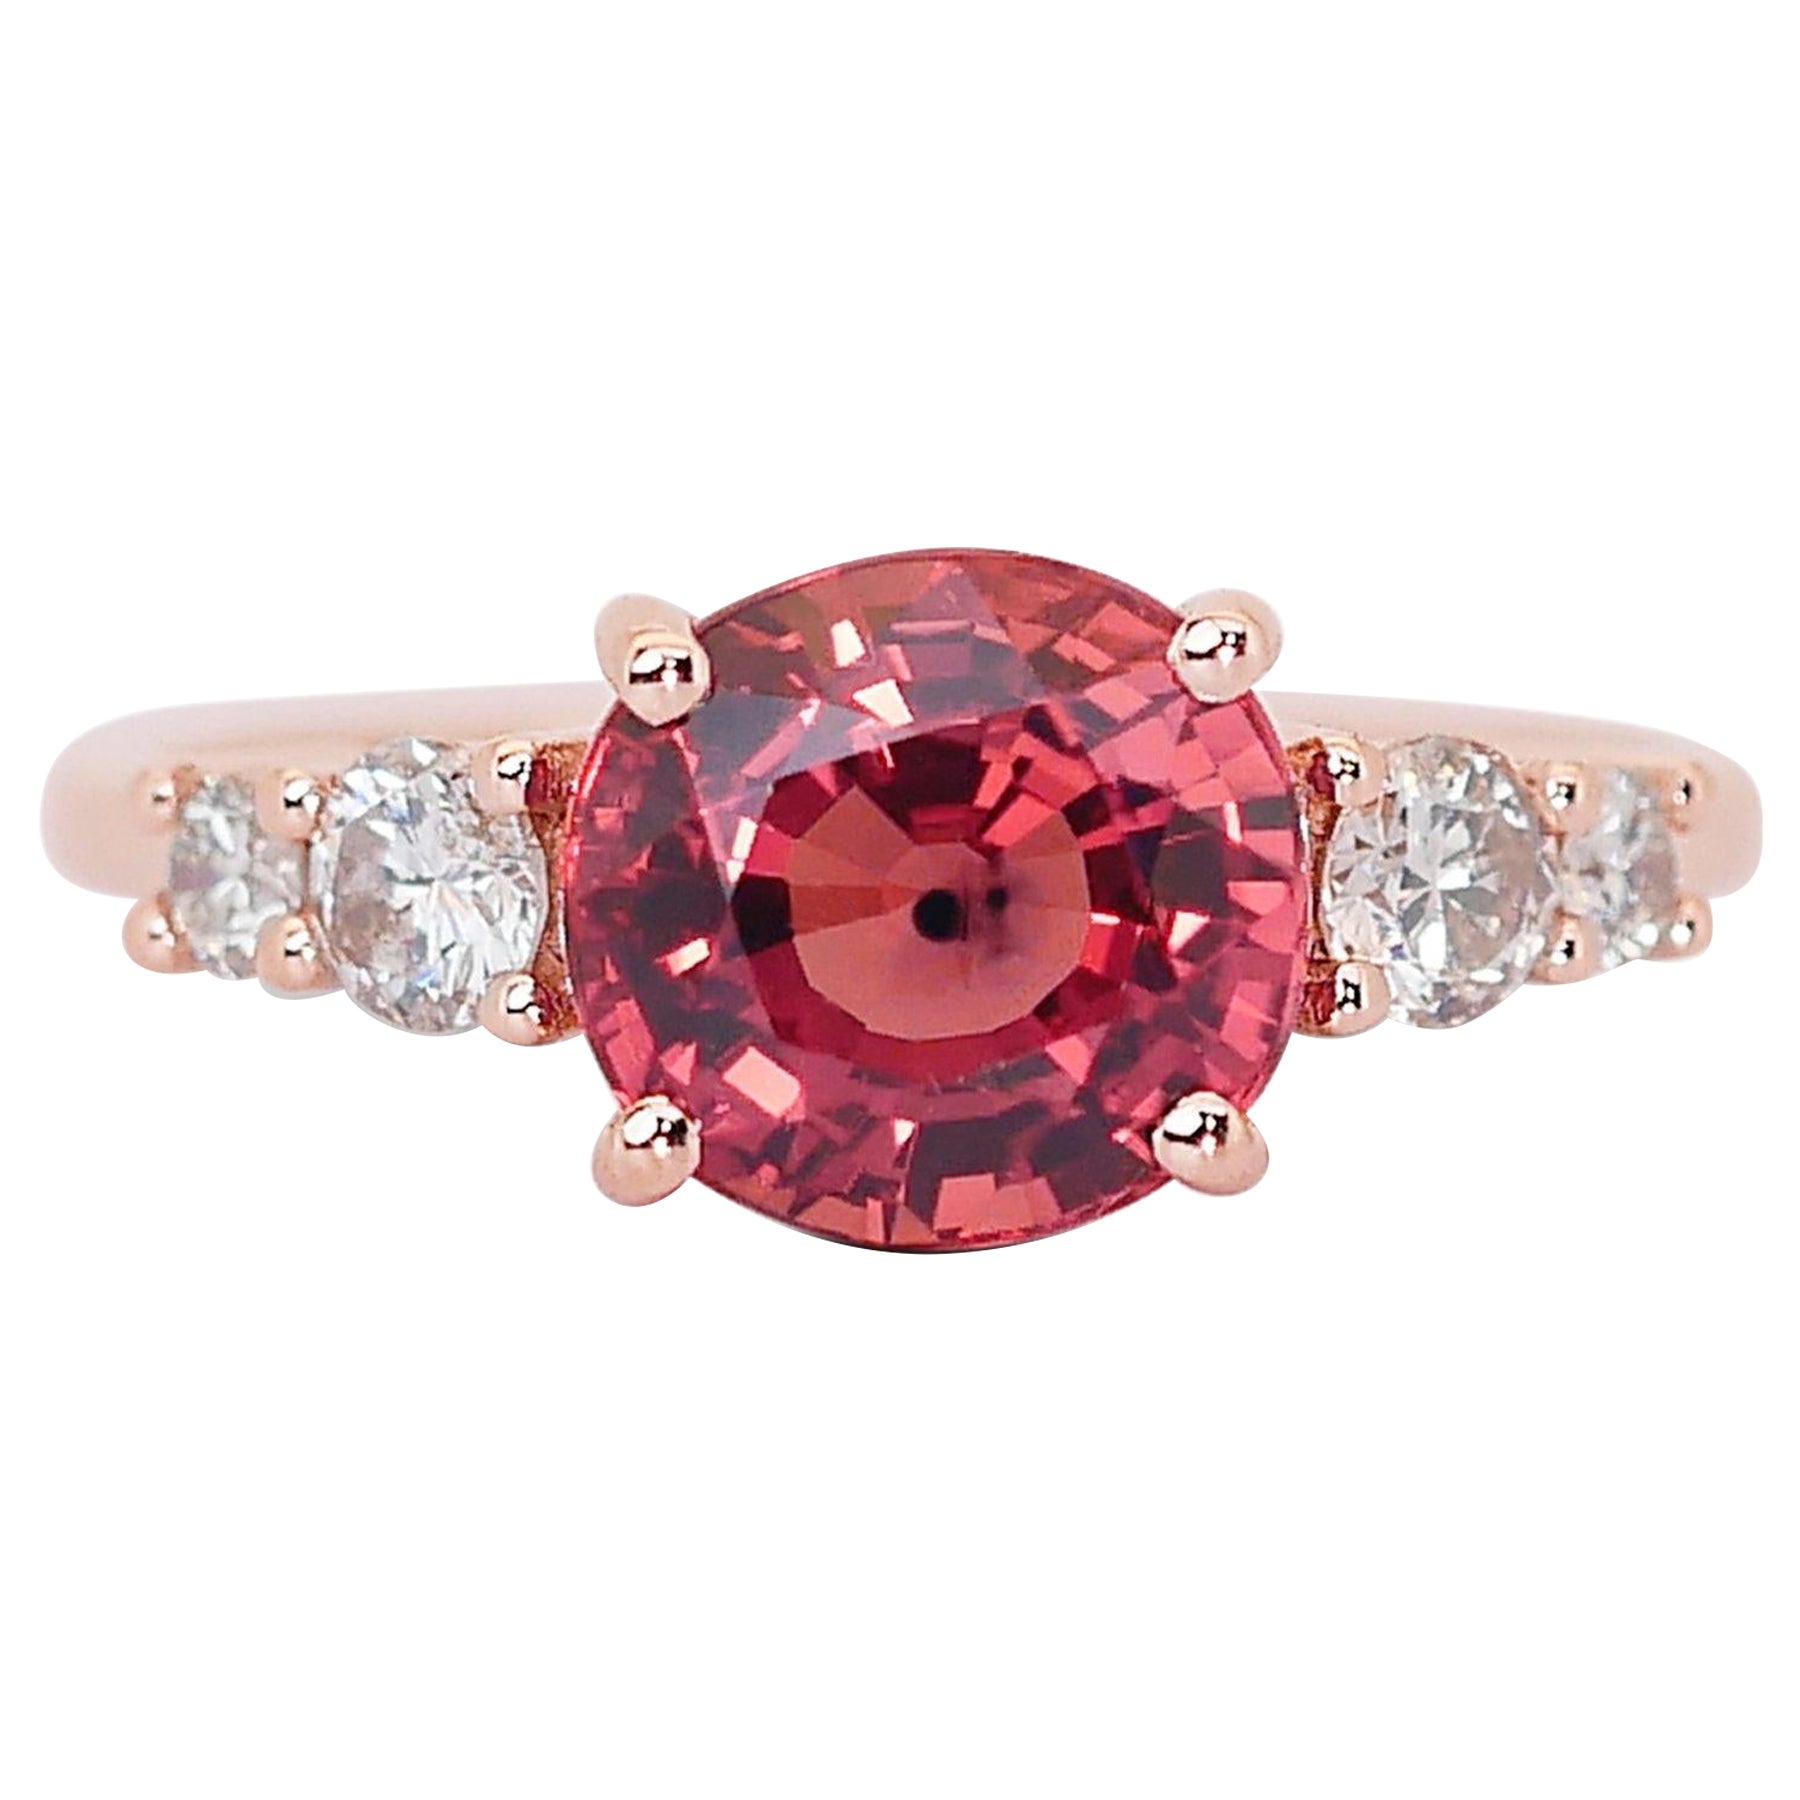 Stunning 3.85ct Sapphire and Diamonds Pave Ring in 18k Rose Gold - IGI Certified For Sale